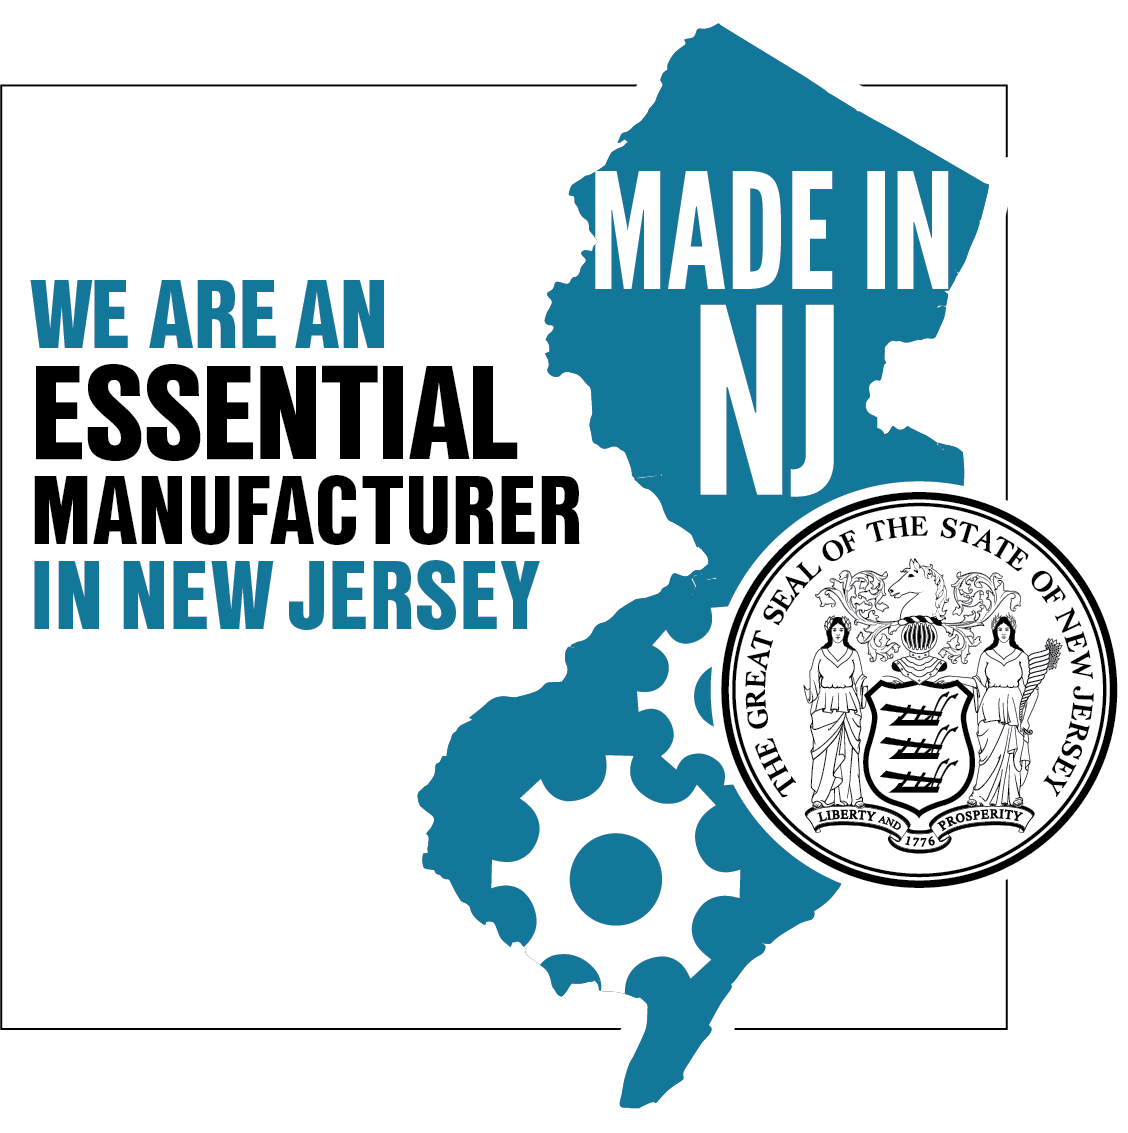 We are an essential manufacturer in New Jersey